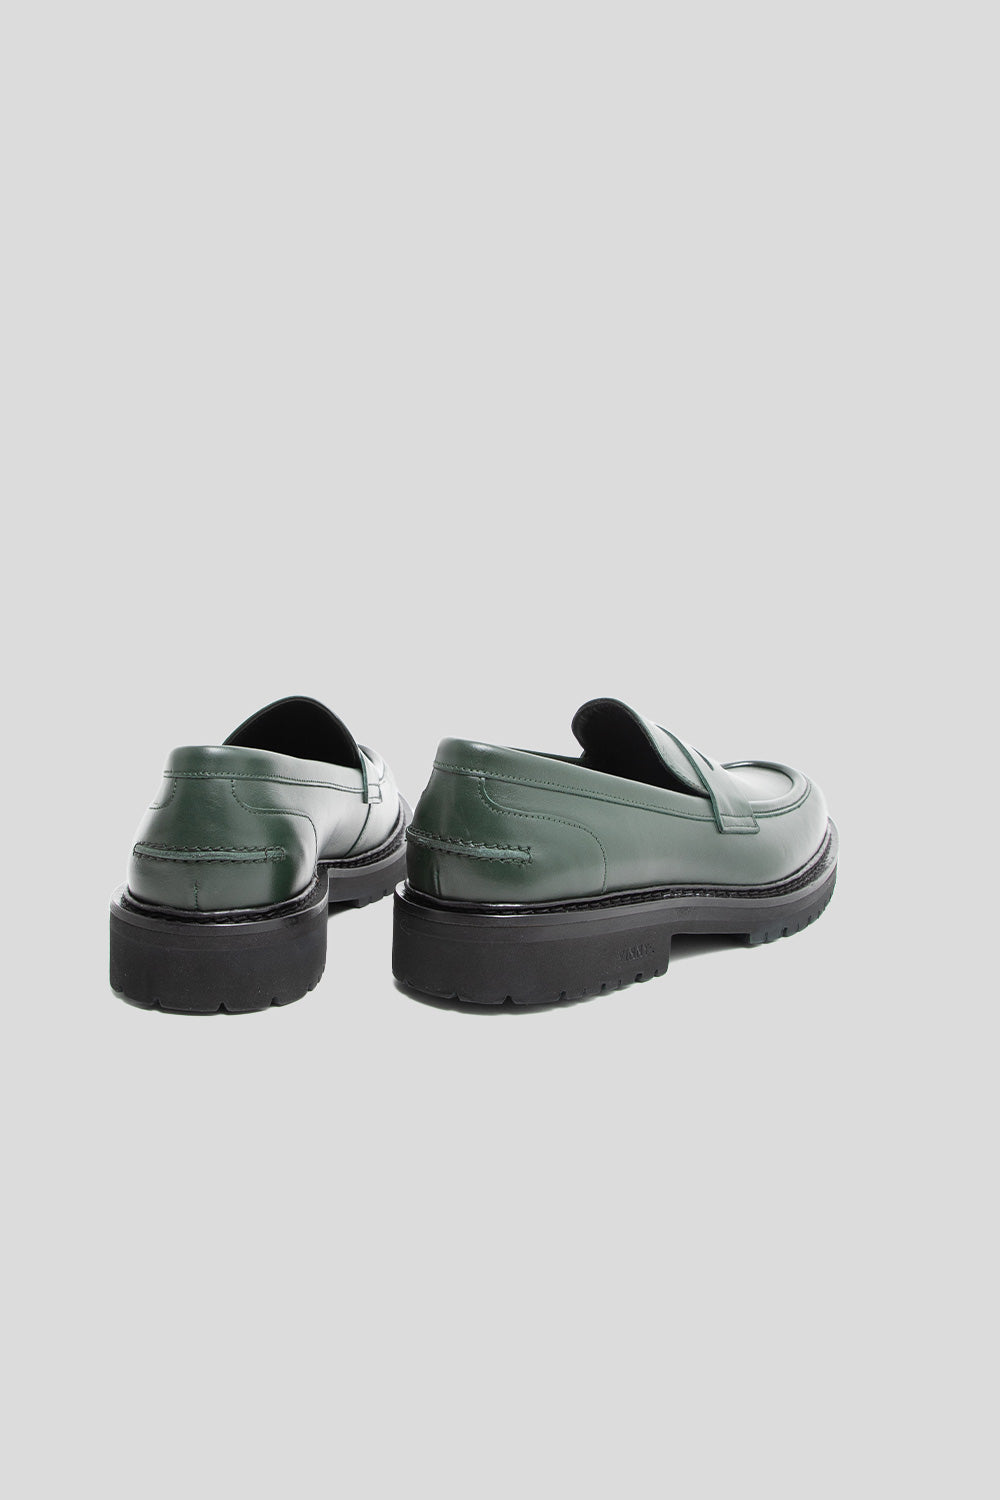 Vinny&#39;s Richee Penny Loafer in Basil Green